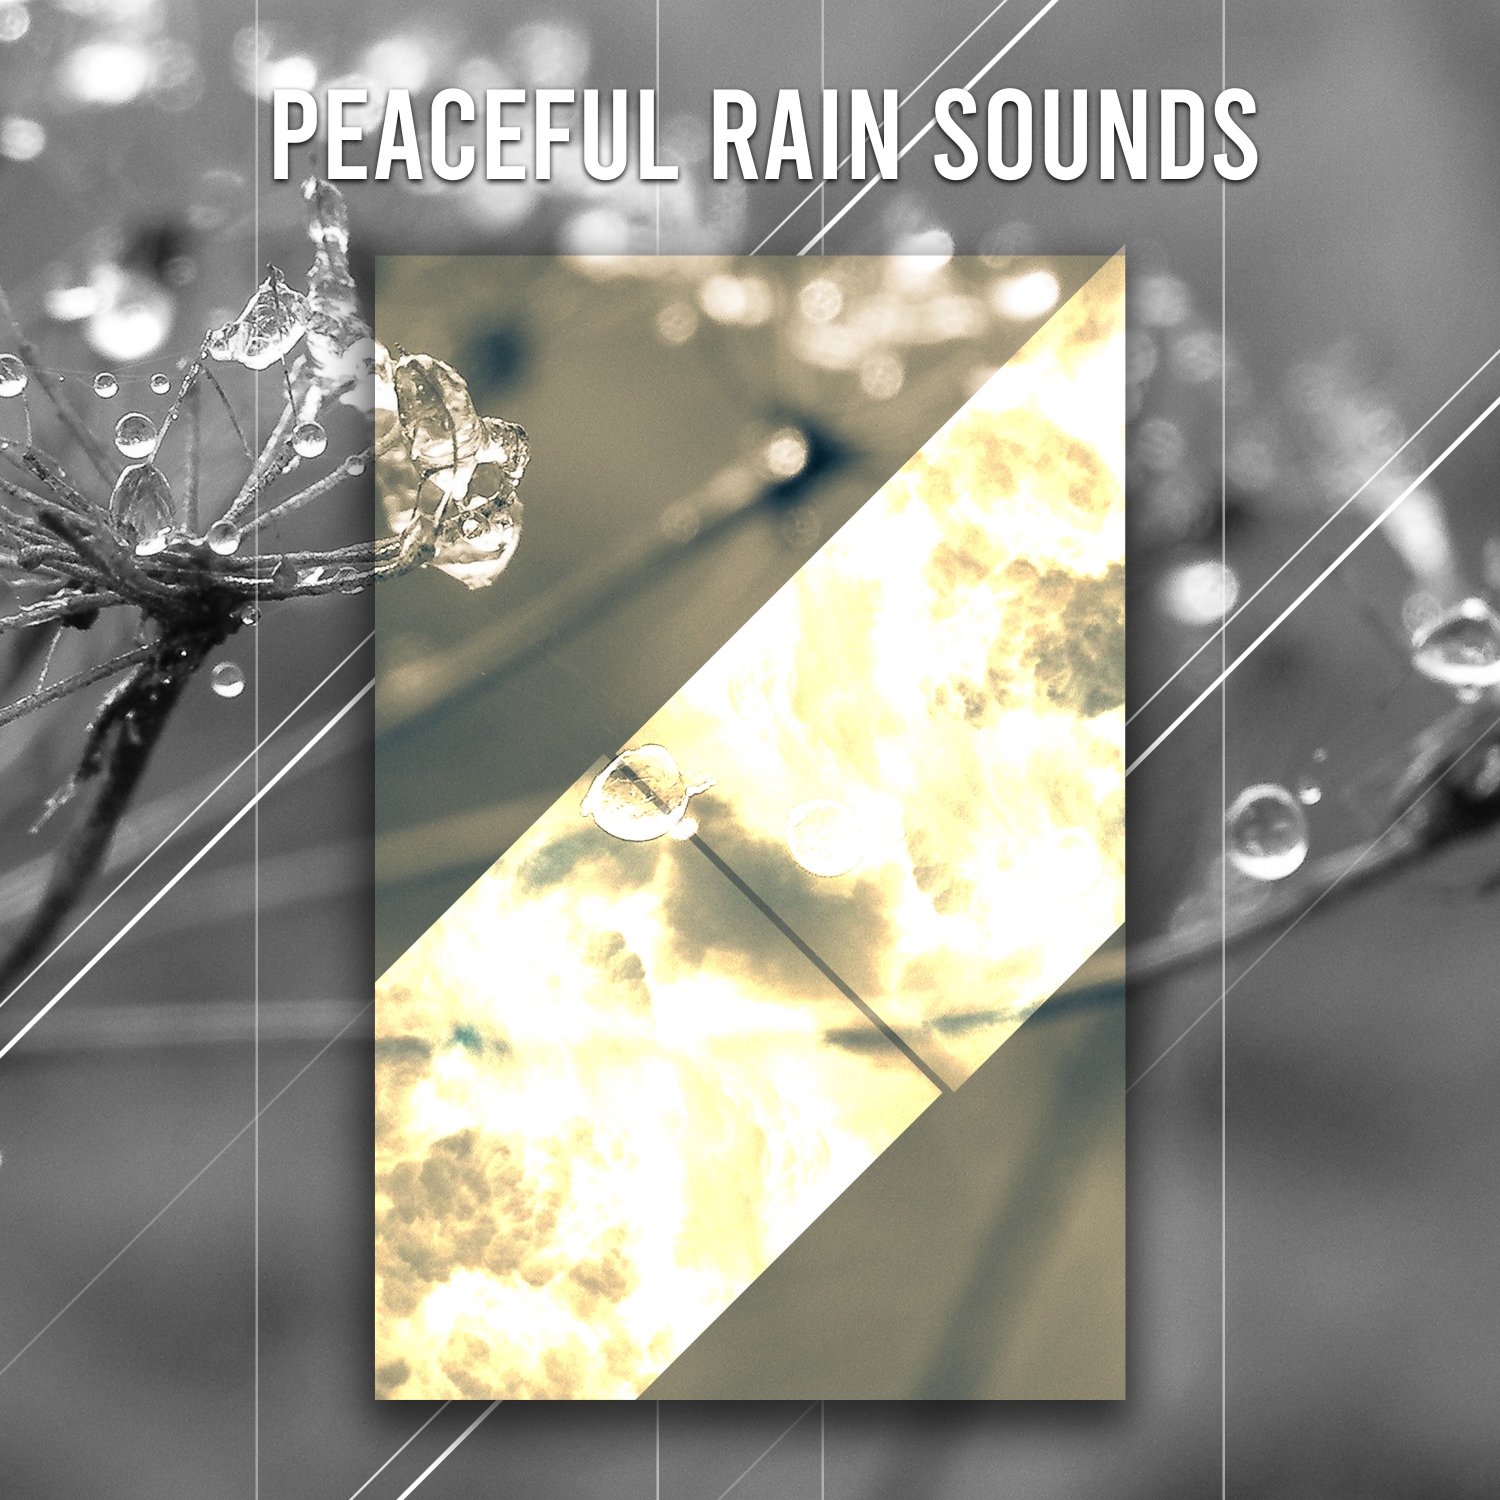 17 Rain Sounds for Sleep: Peaceful Background Sound, White Noise, Baby Sleep Aid, Relaxing Nature Sound